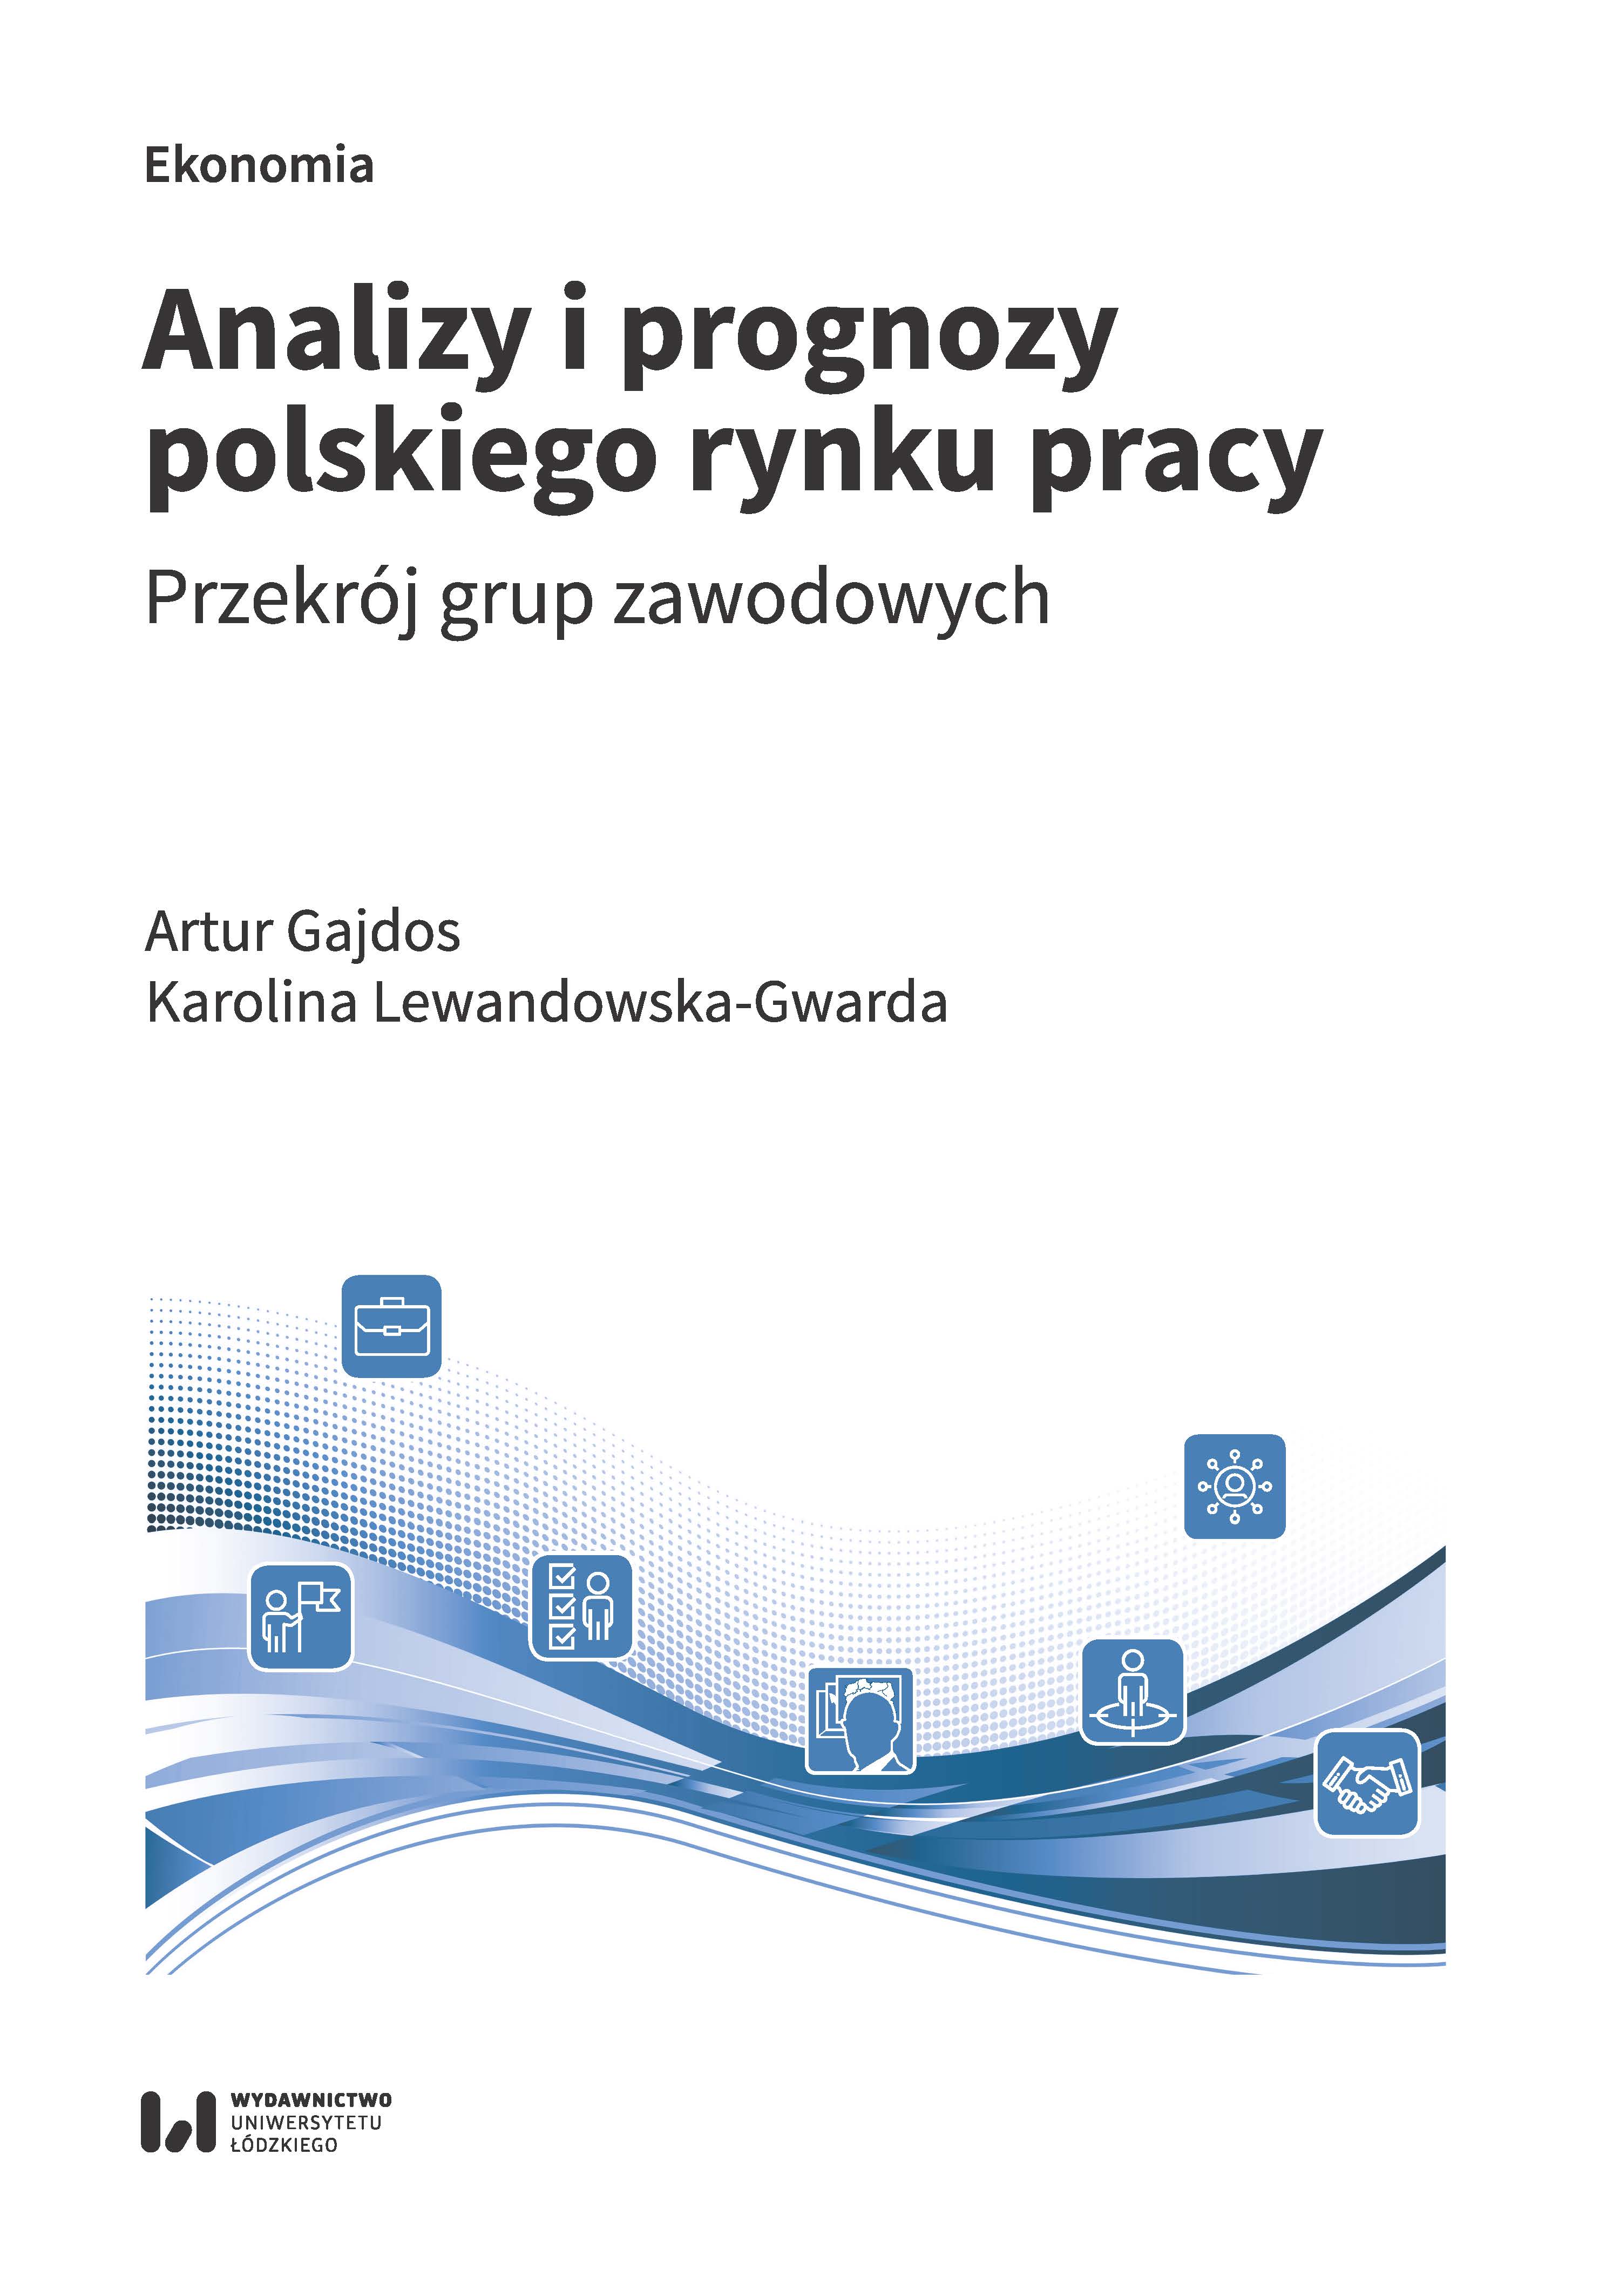 Analyses and forecasts of polish labour market. Cross-section of occupations groups